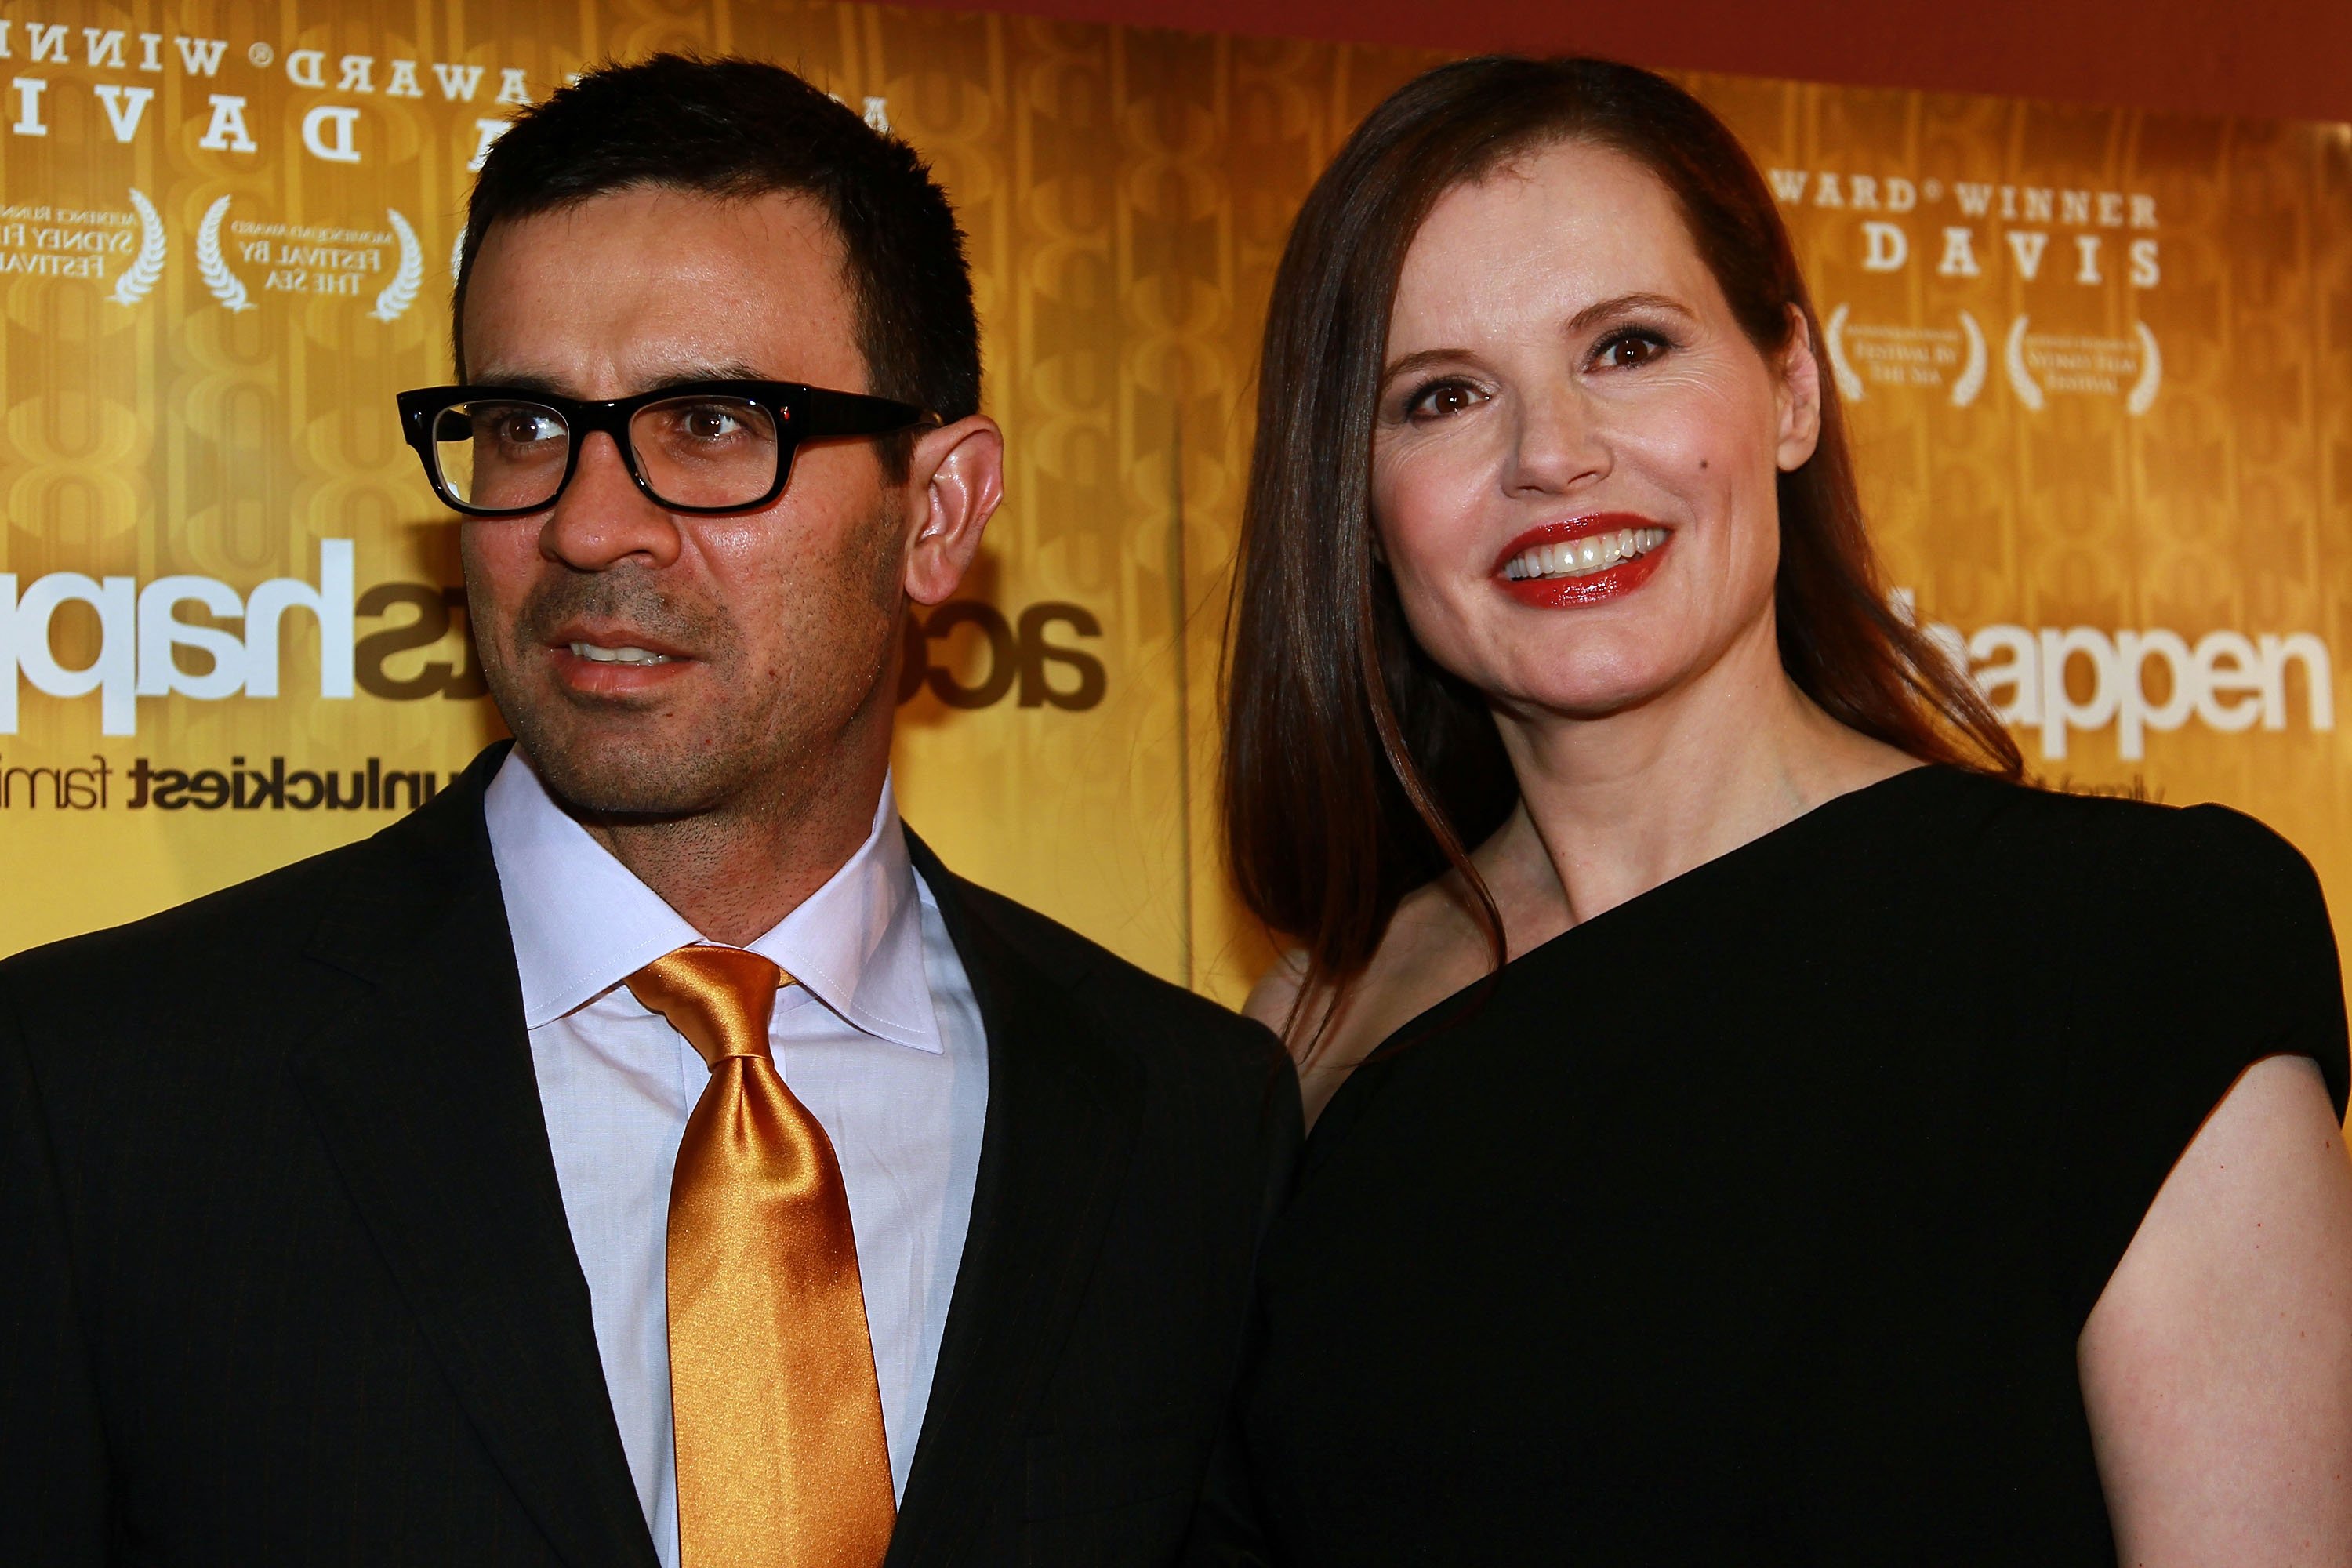 Reza Jarrahy and Geena Davis at the premiere of "accidents happen" at the Cremorne Orpheum on April 14, 2010 in Sydney, Australia.  / Source: Getty Images